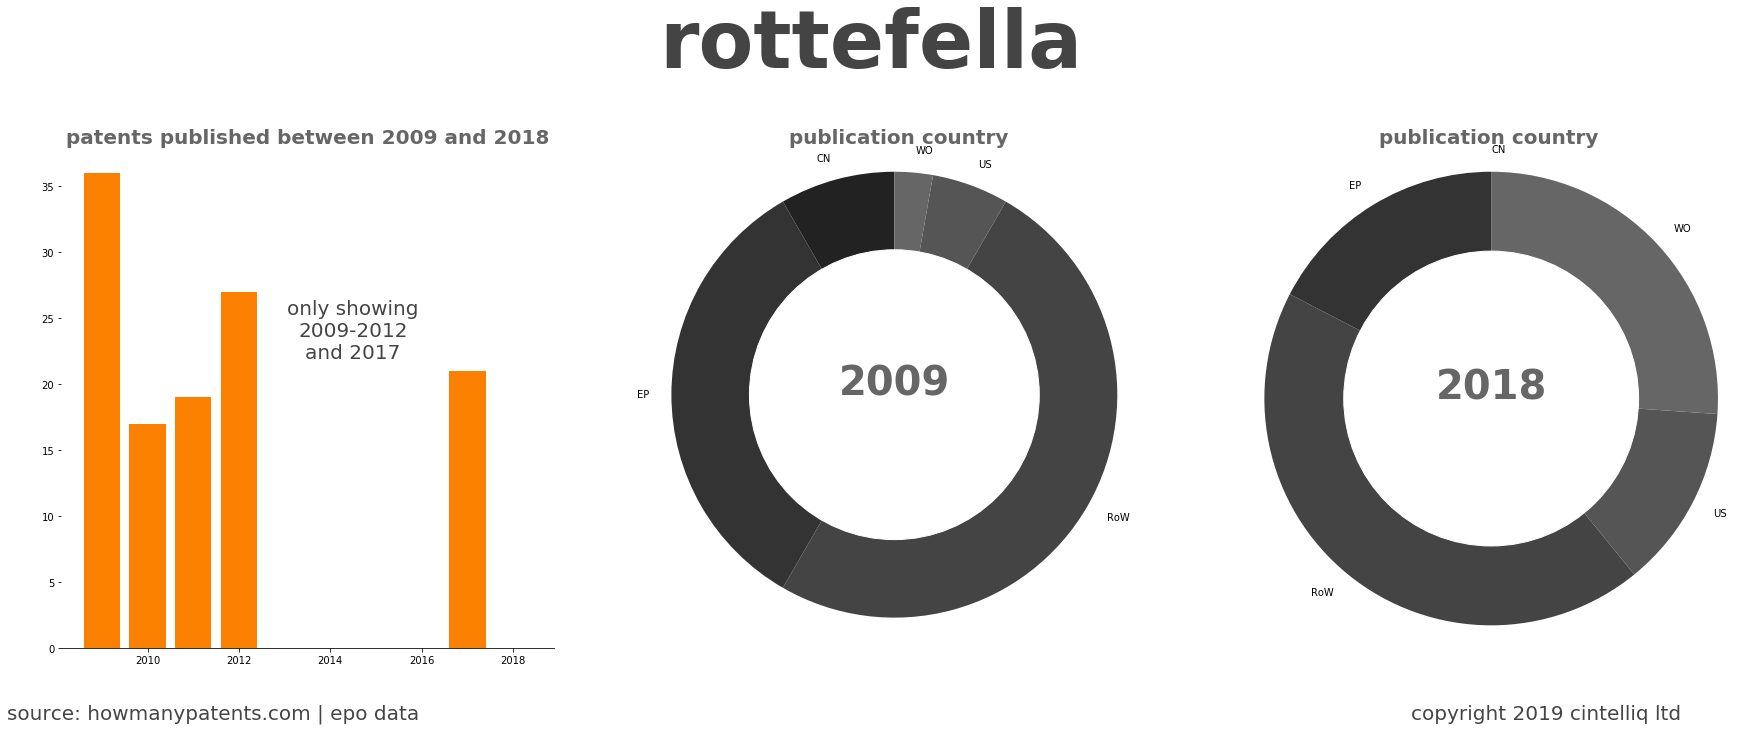 summary of patents for Rottefella